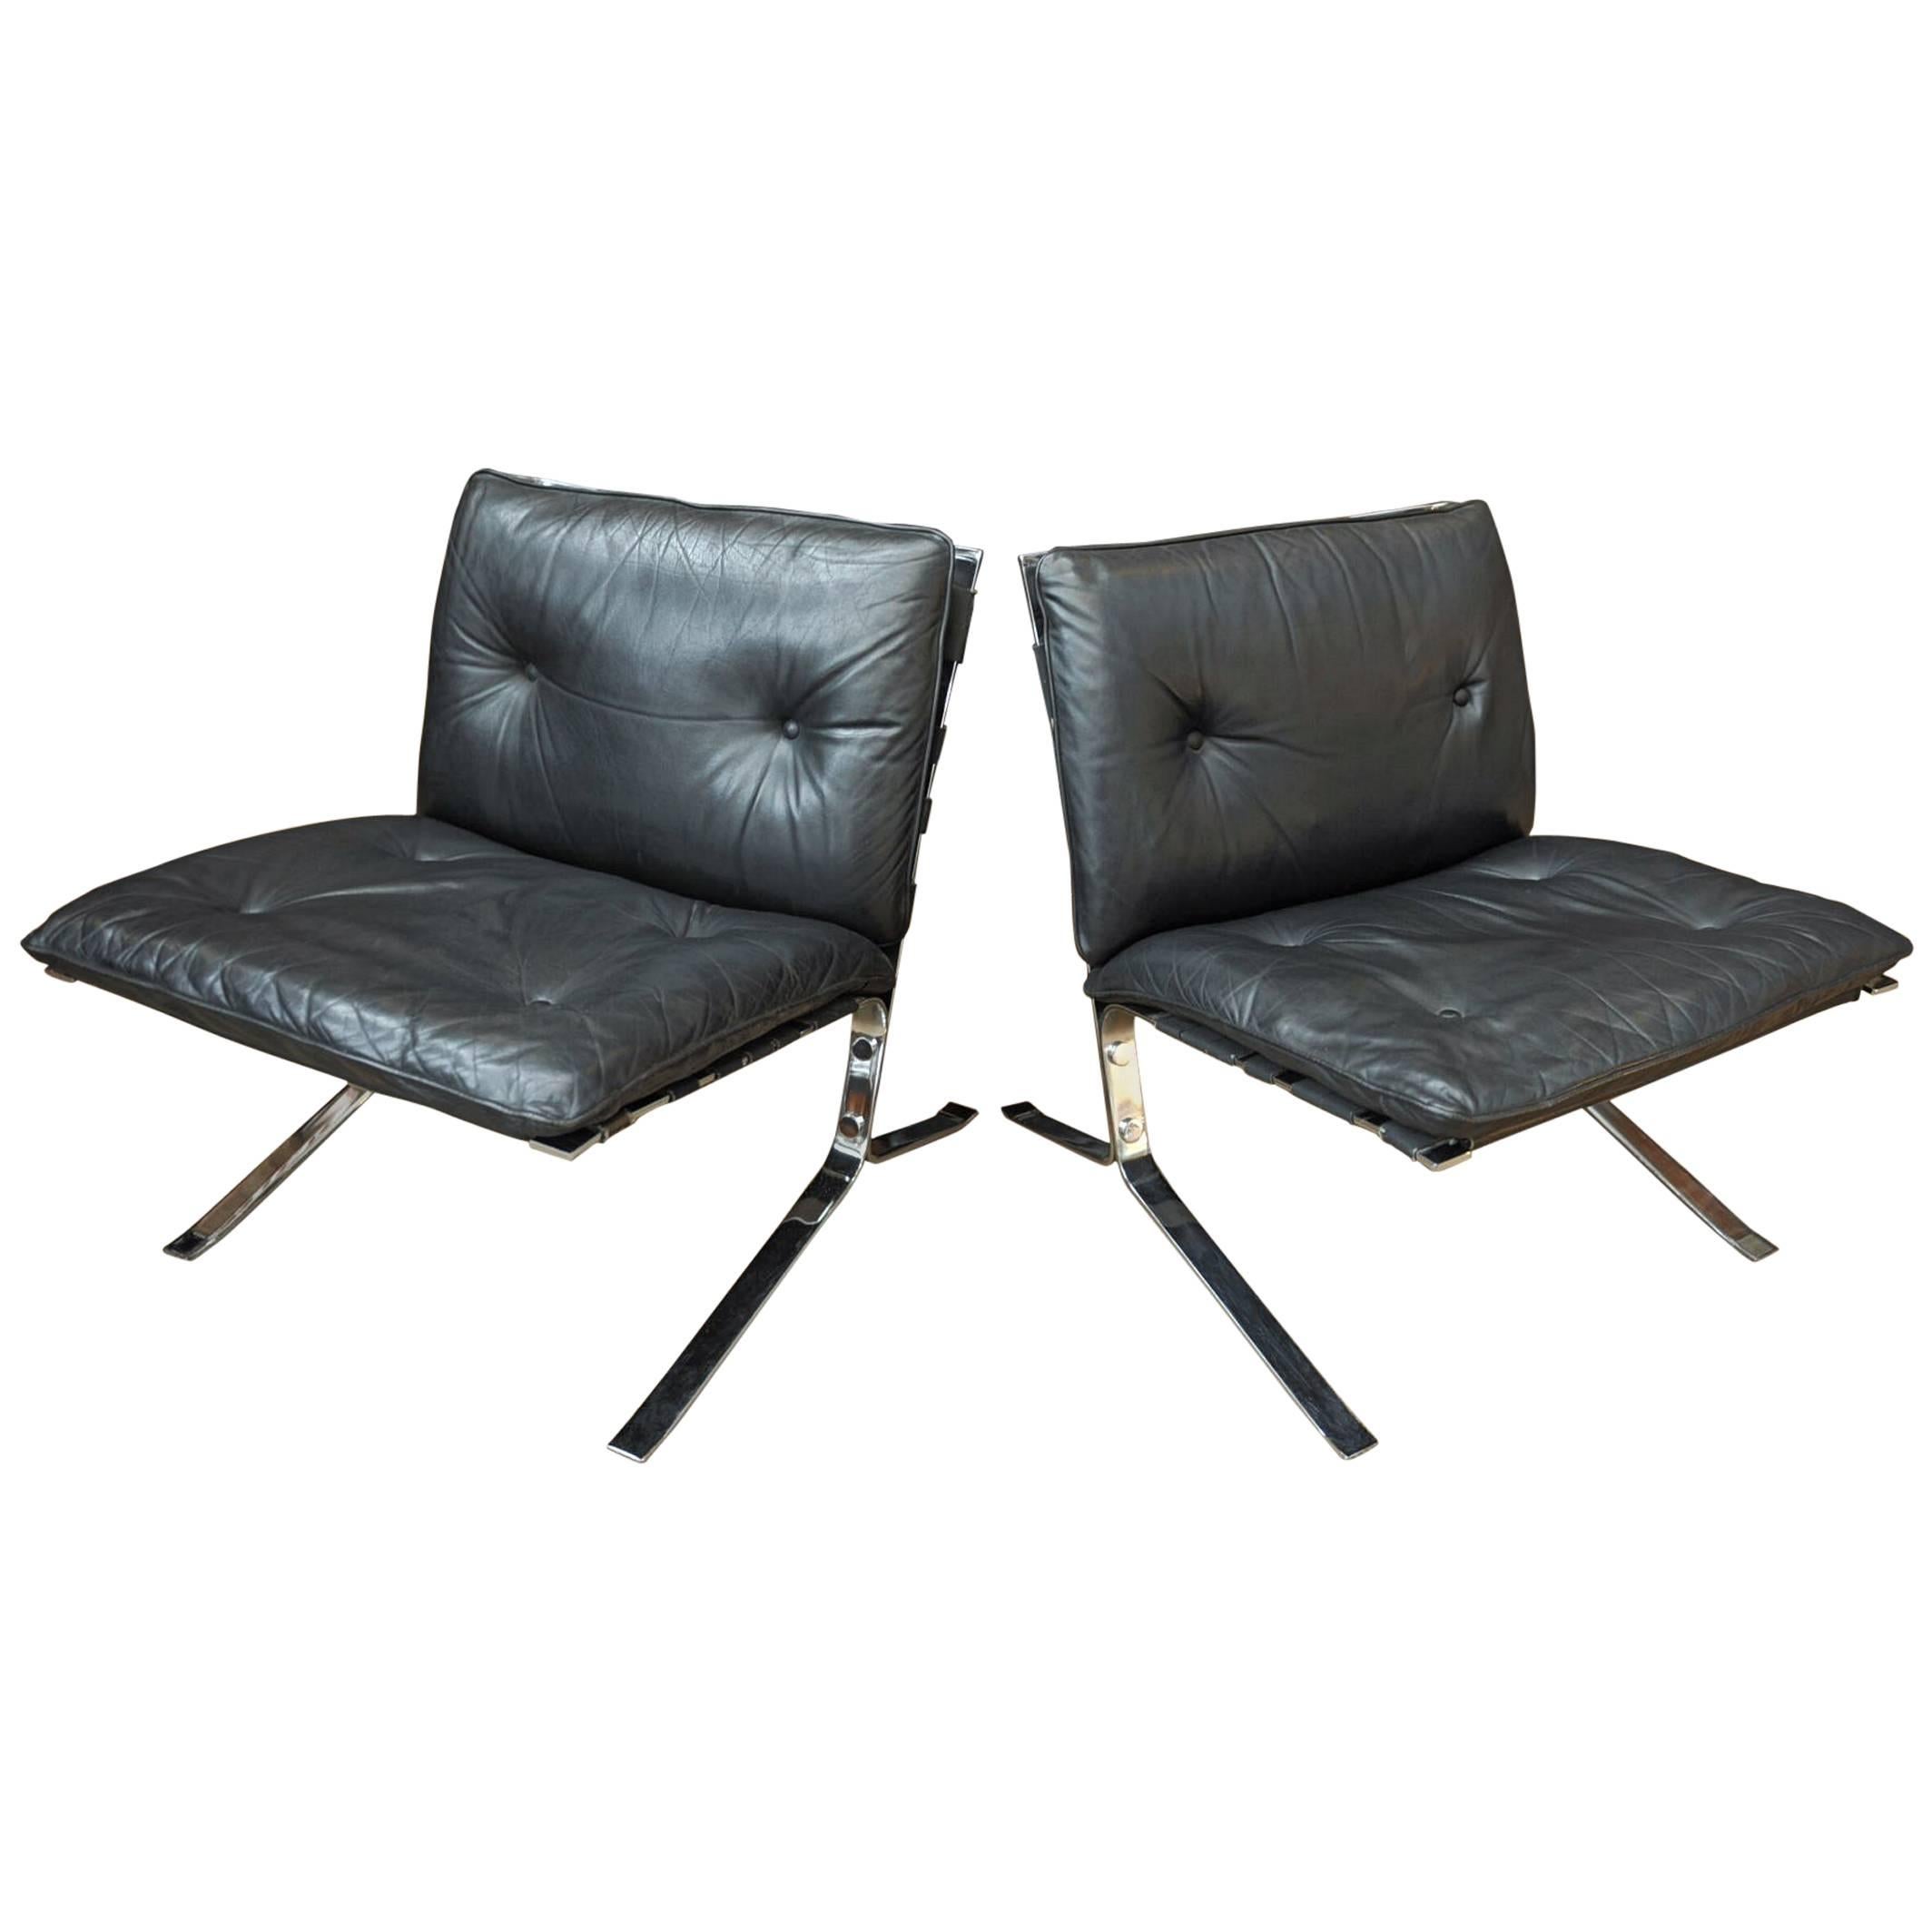 "Joker" Leather and Chrome Metal Chairs by Olivier Mourgue